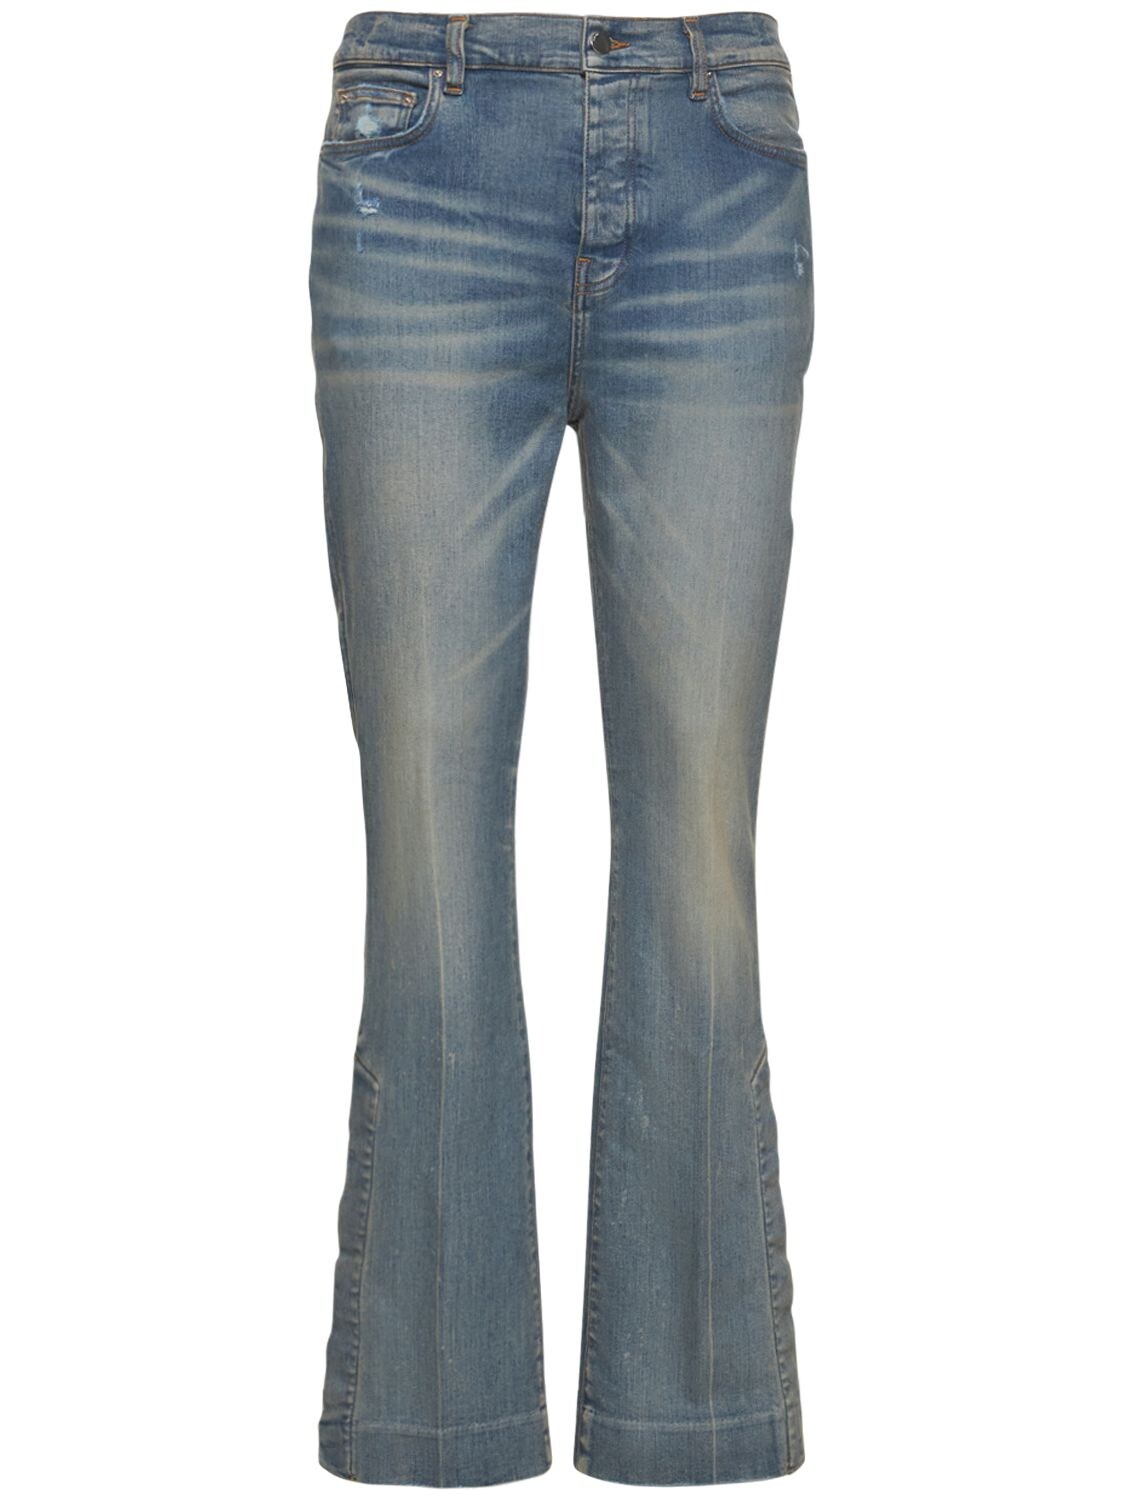 Stacked Cotton Denim Flared Jeans